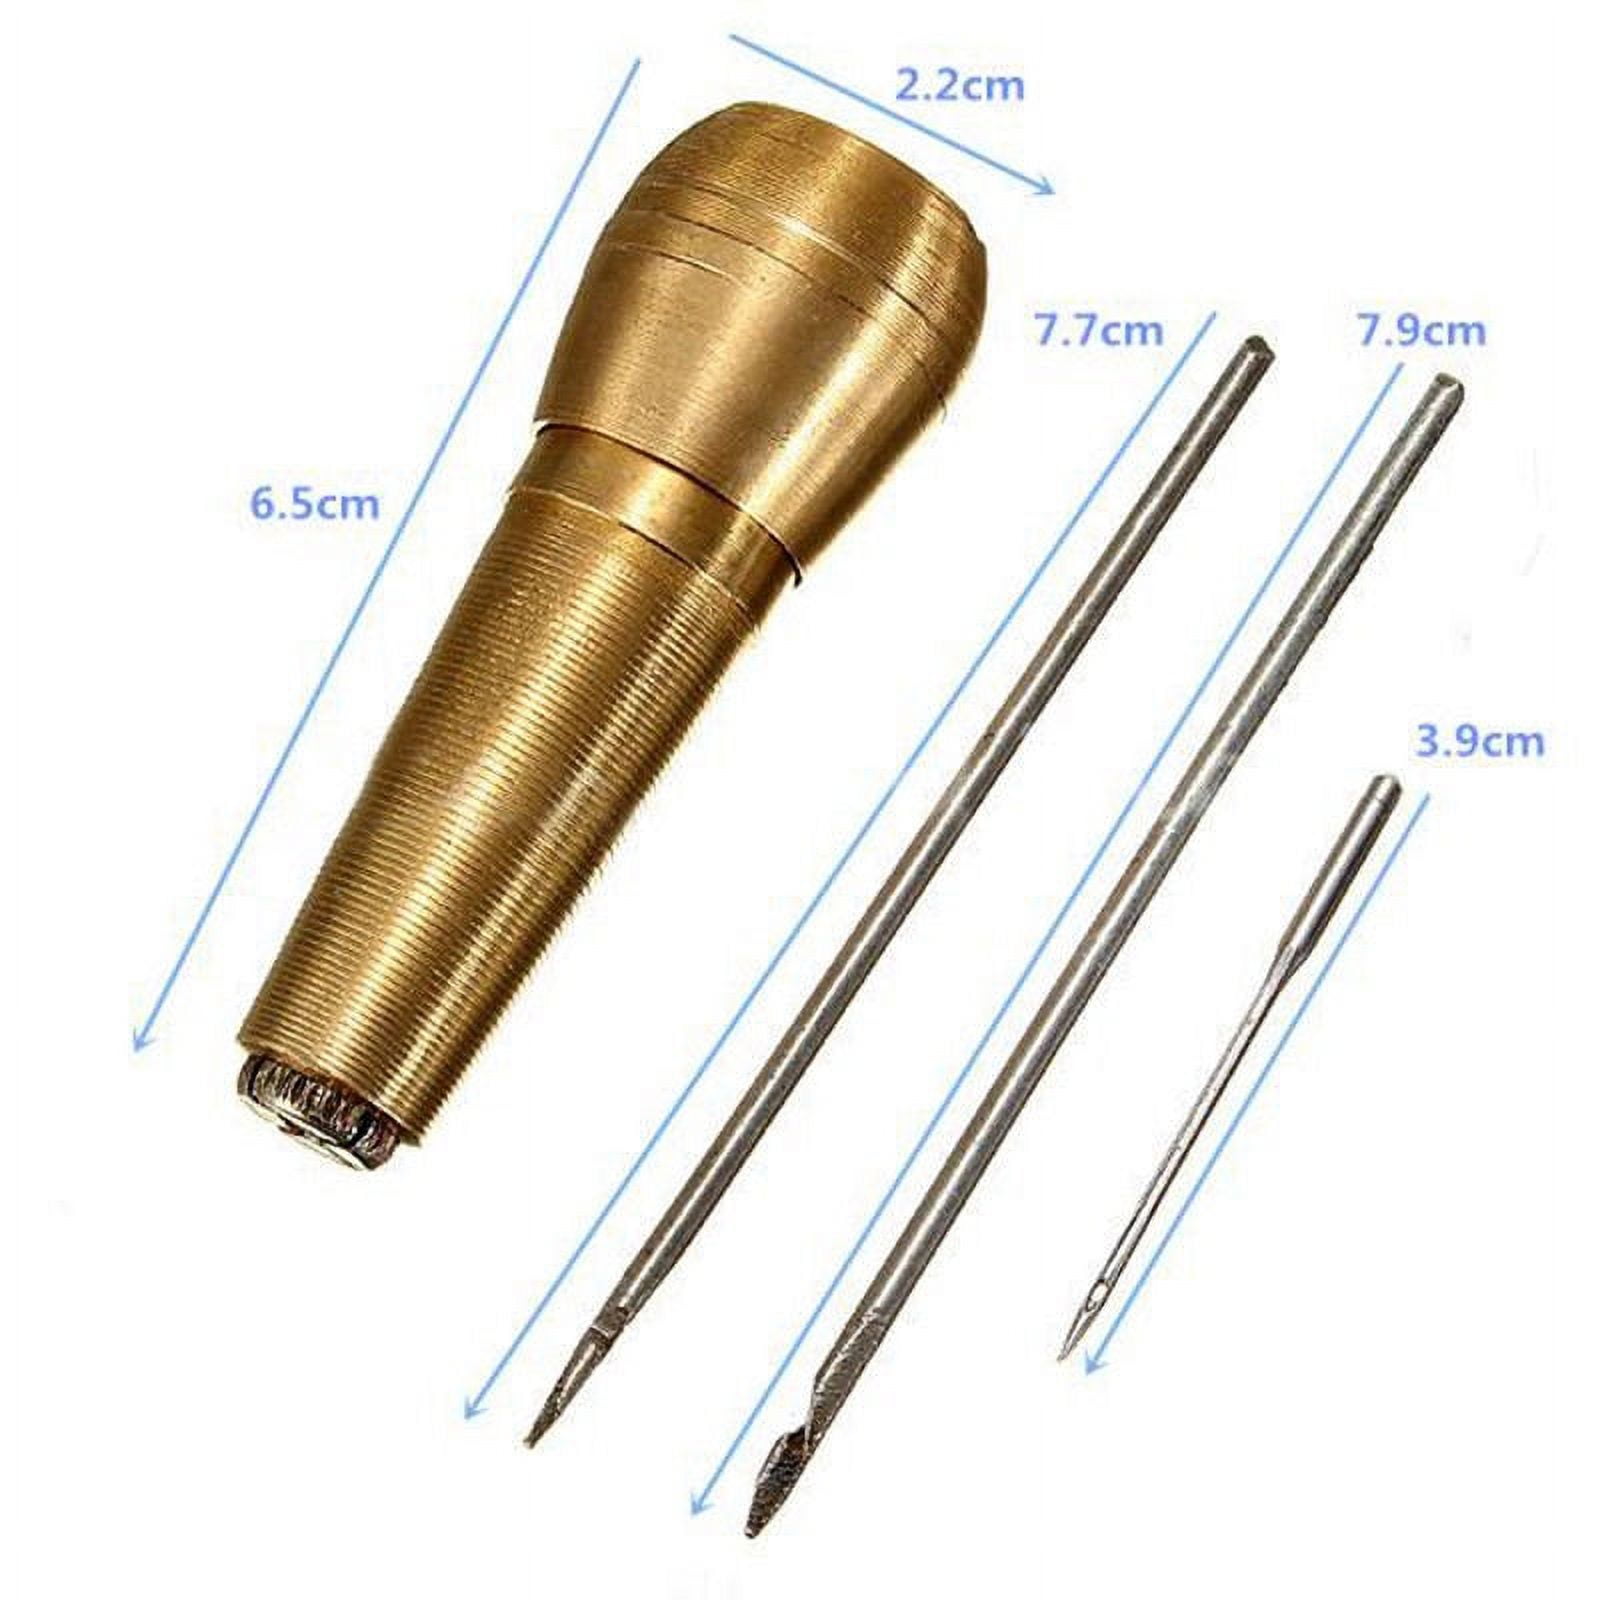 BORDSTRACT 6pcs Leather Sewing Awl, Good Control Canvas Hand Stitch Sewing Needle Awl with 2 Copper Handle, Craft Repair Kit Tools for Handmade Shoe